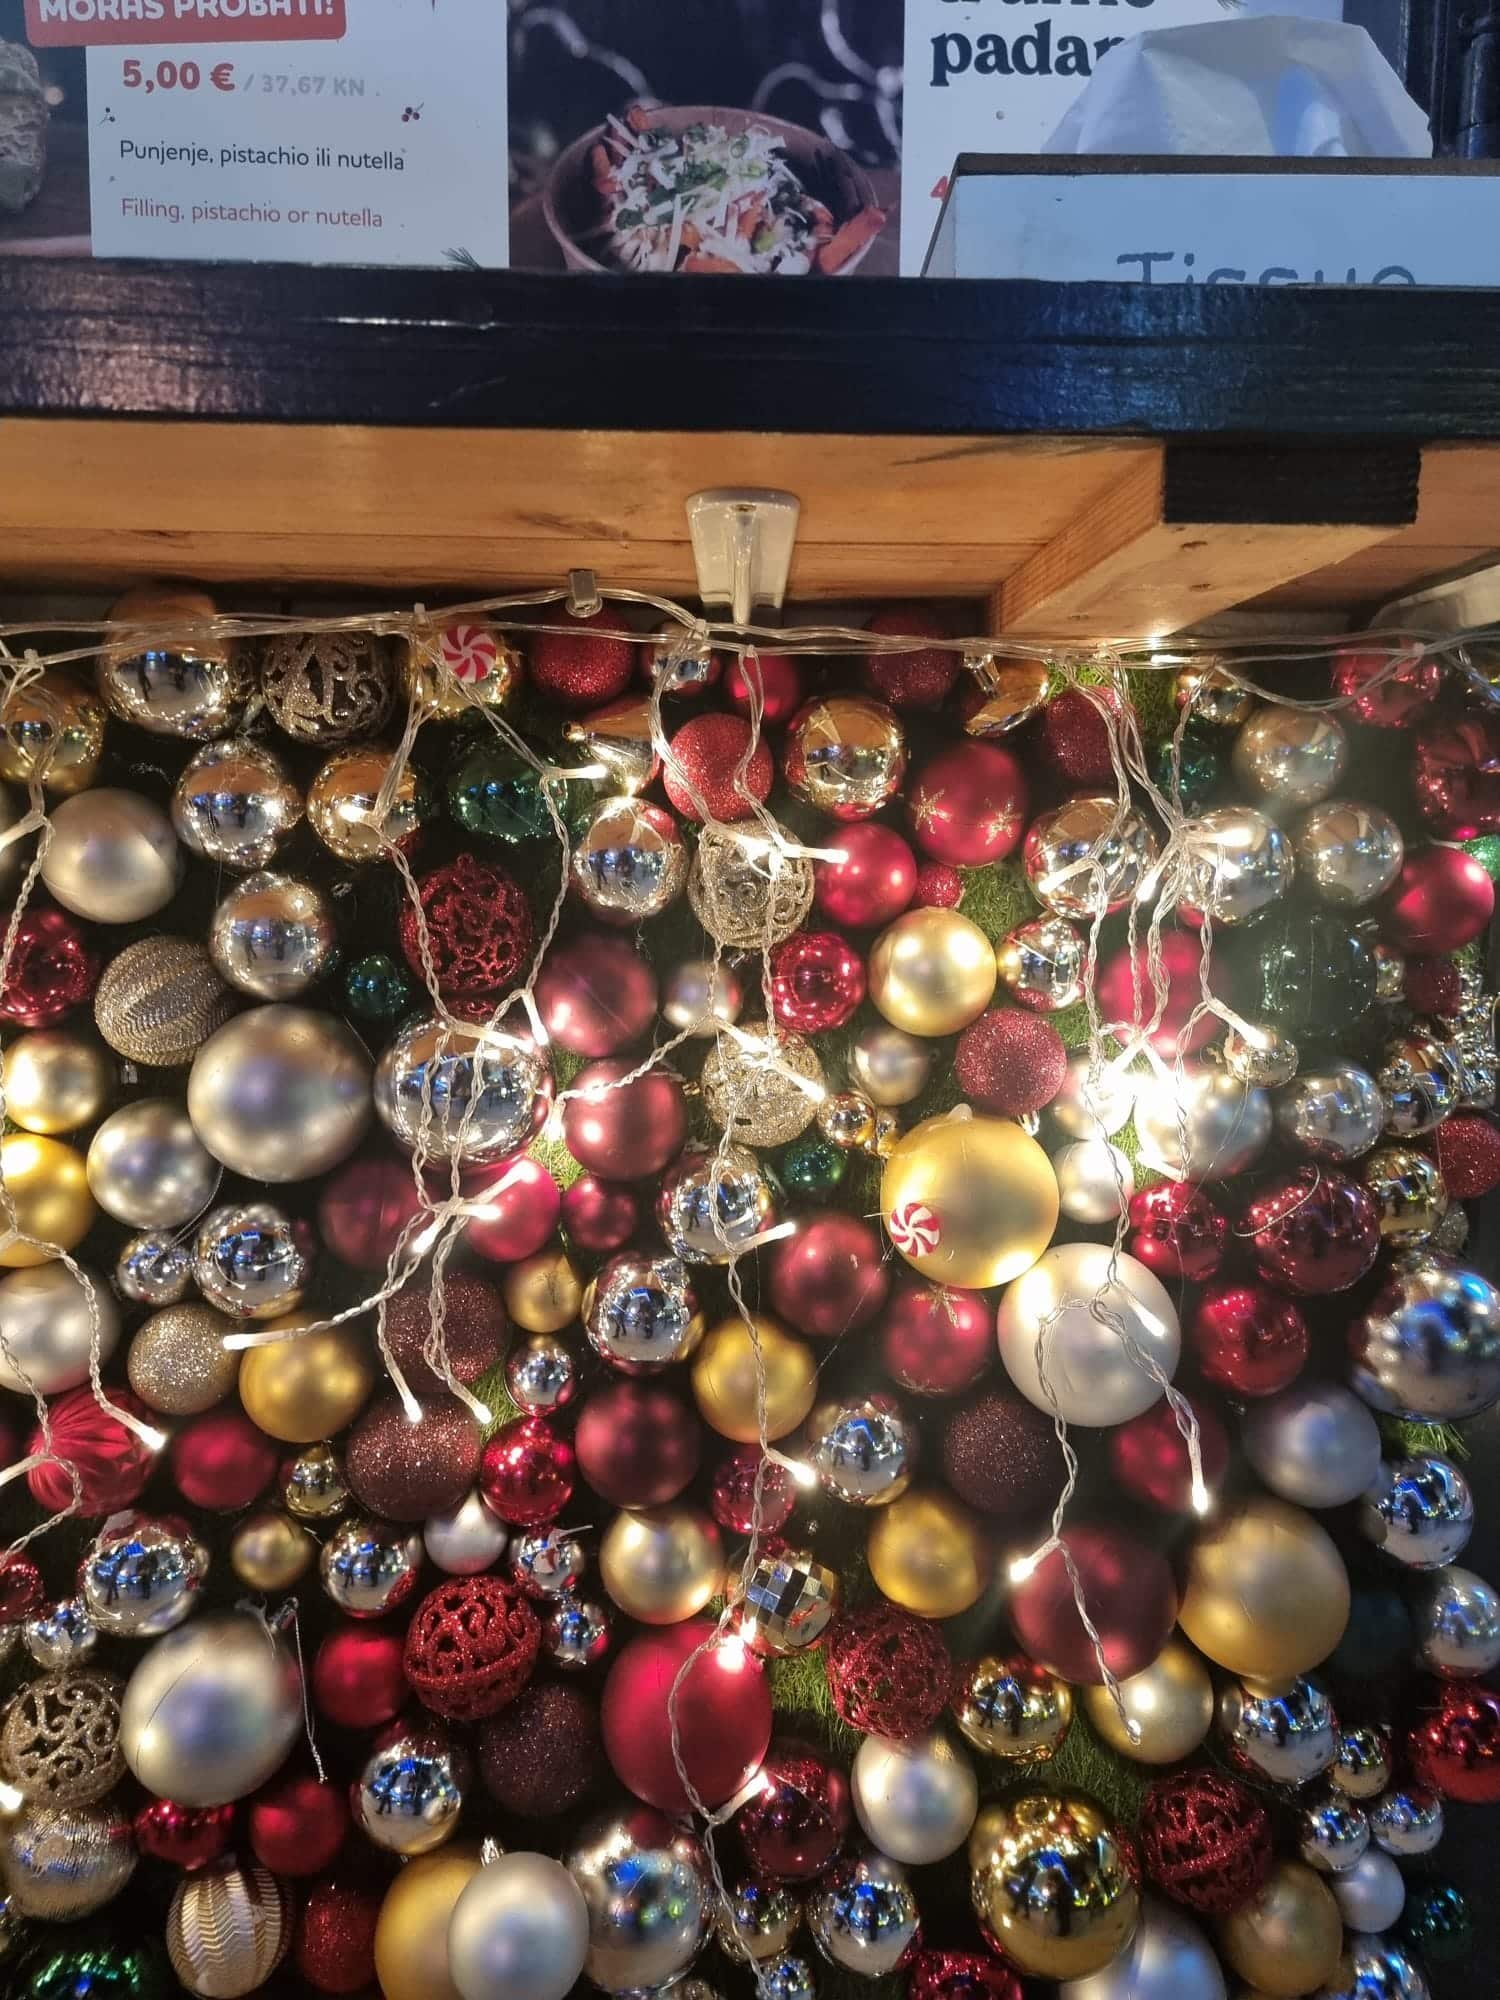 A festive display of Christmas ornaments in a store, sprinkled with the spirit of Advent.